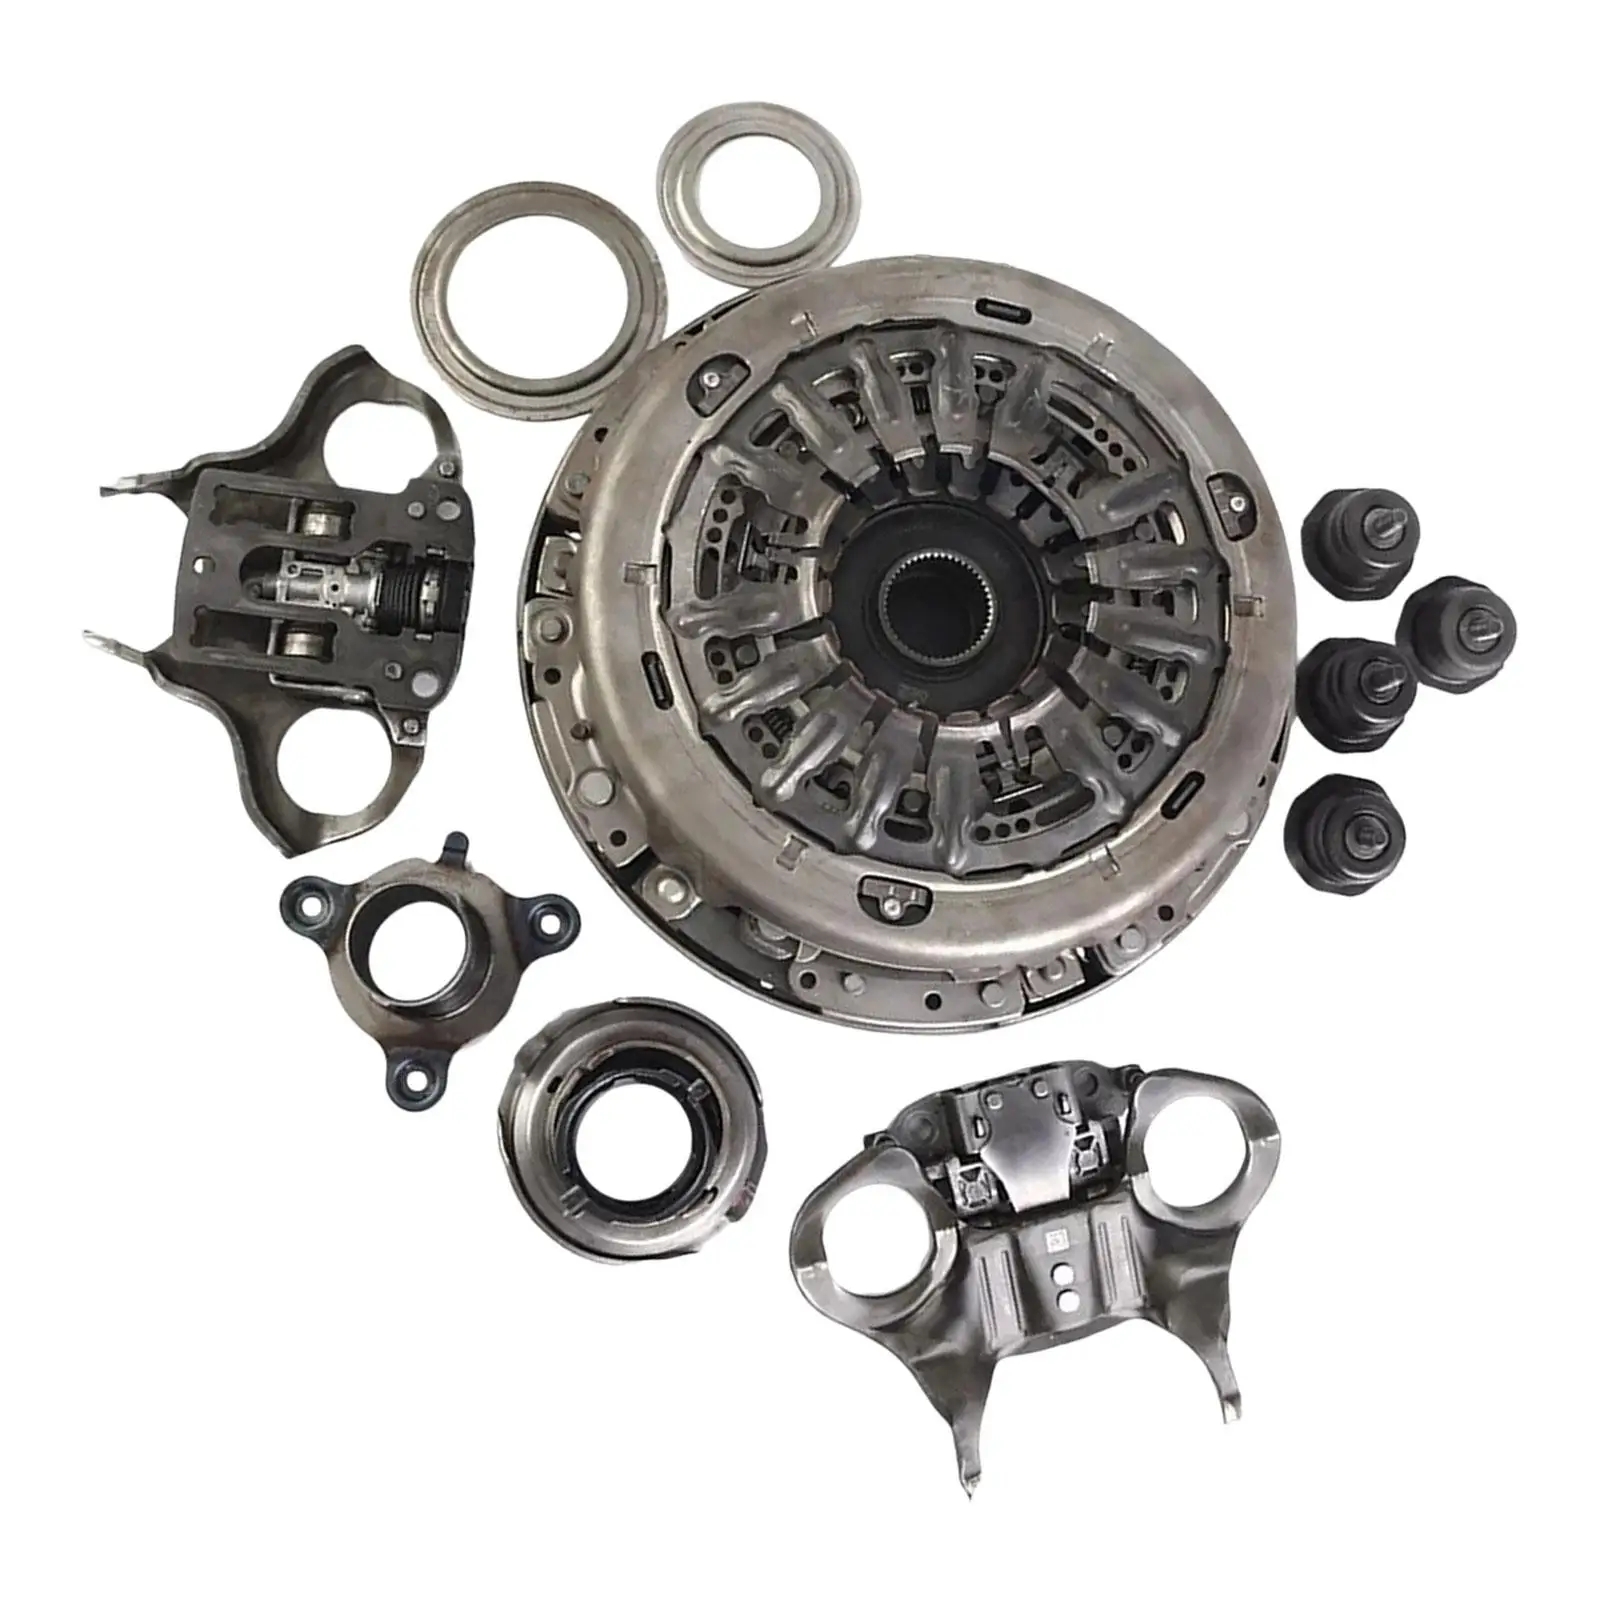 

Car Automatic Transmission Clutch Set 6Dct250 Dps6 Professional Replaces Easily Install Stable